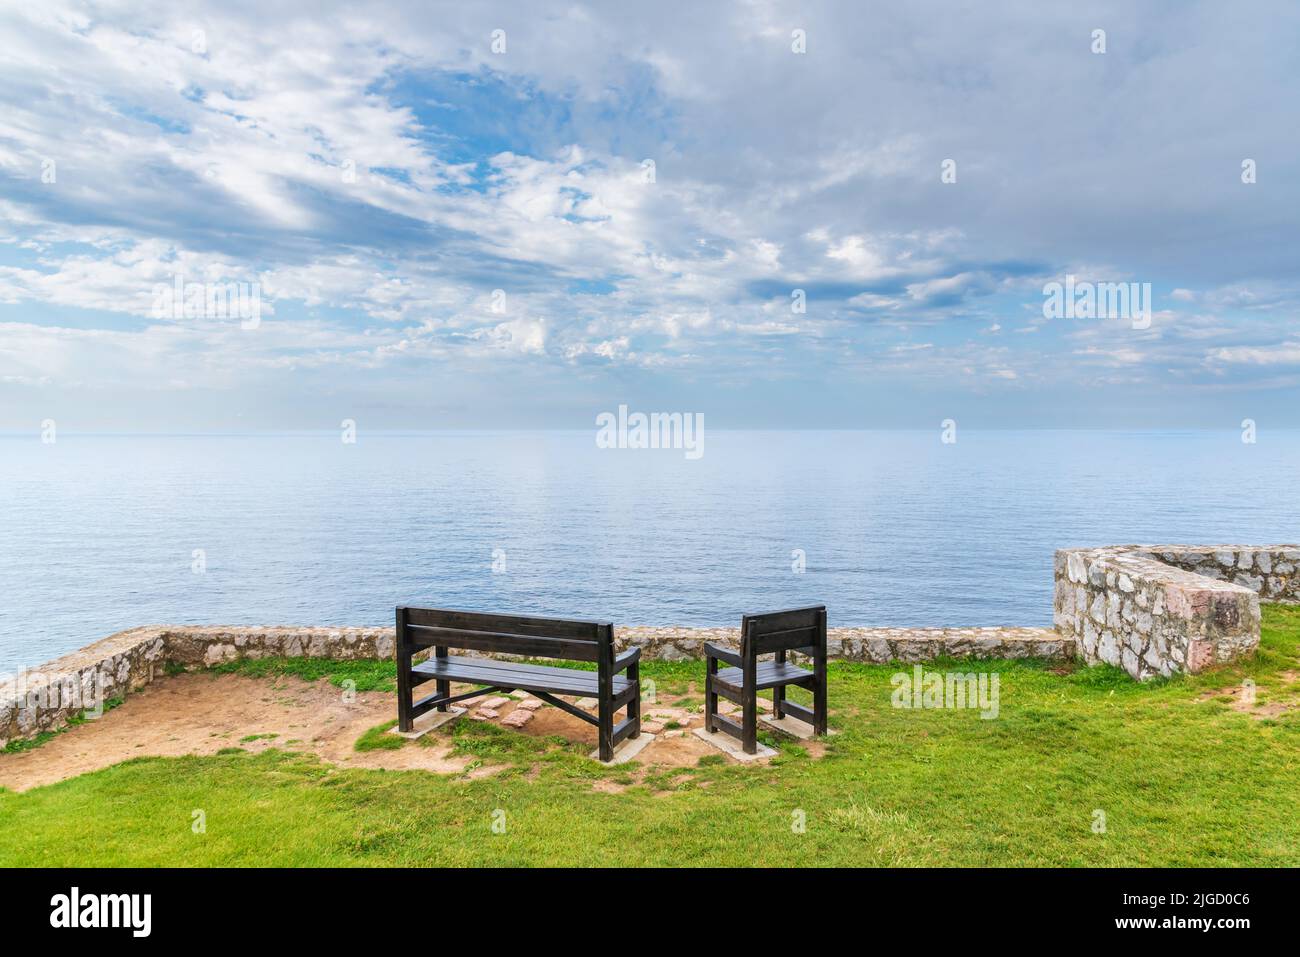 Benches on the Paseo de San Pedro, Llanes, with views of the Cantabrian Sea. Stock Photo